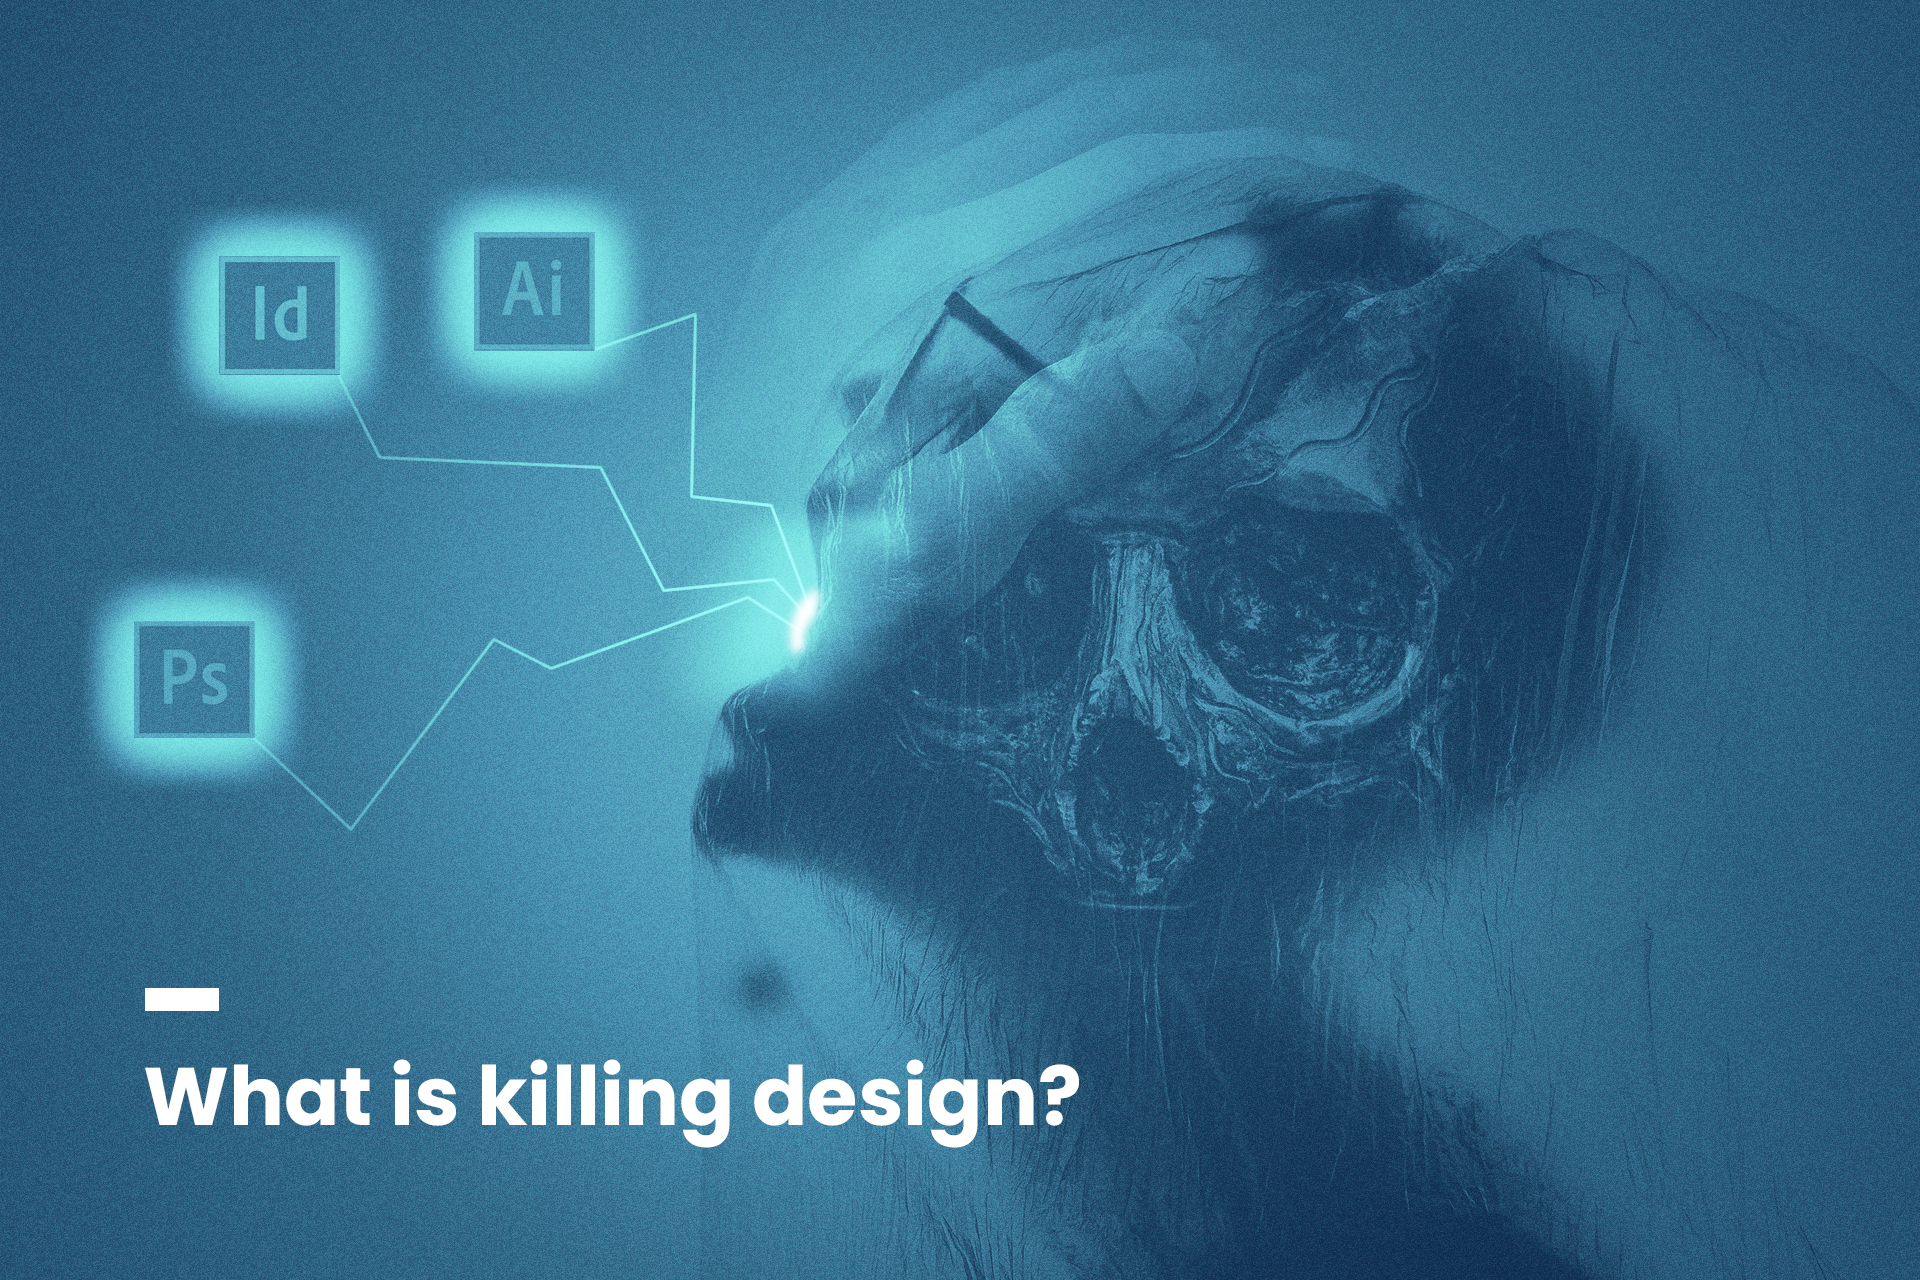 What is killing design?